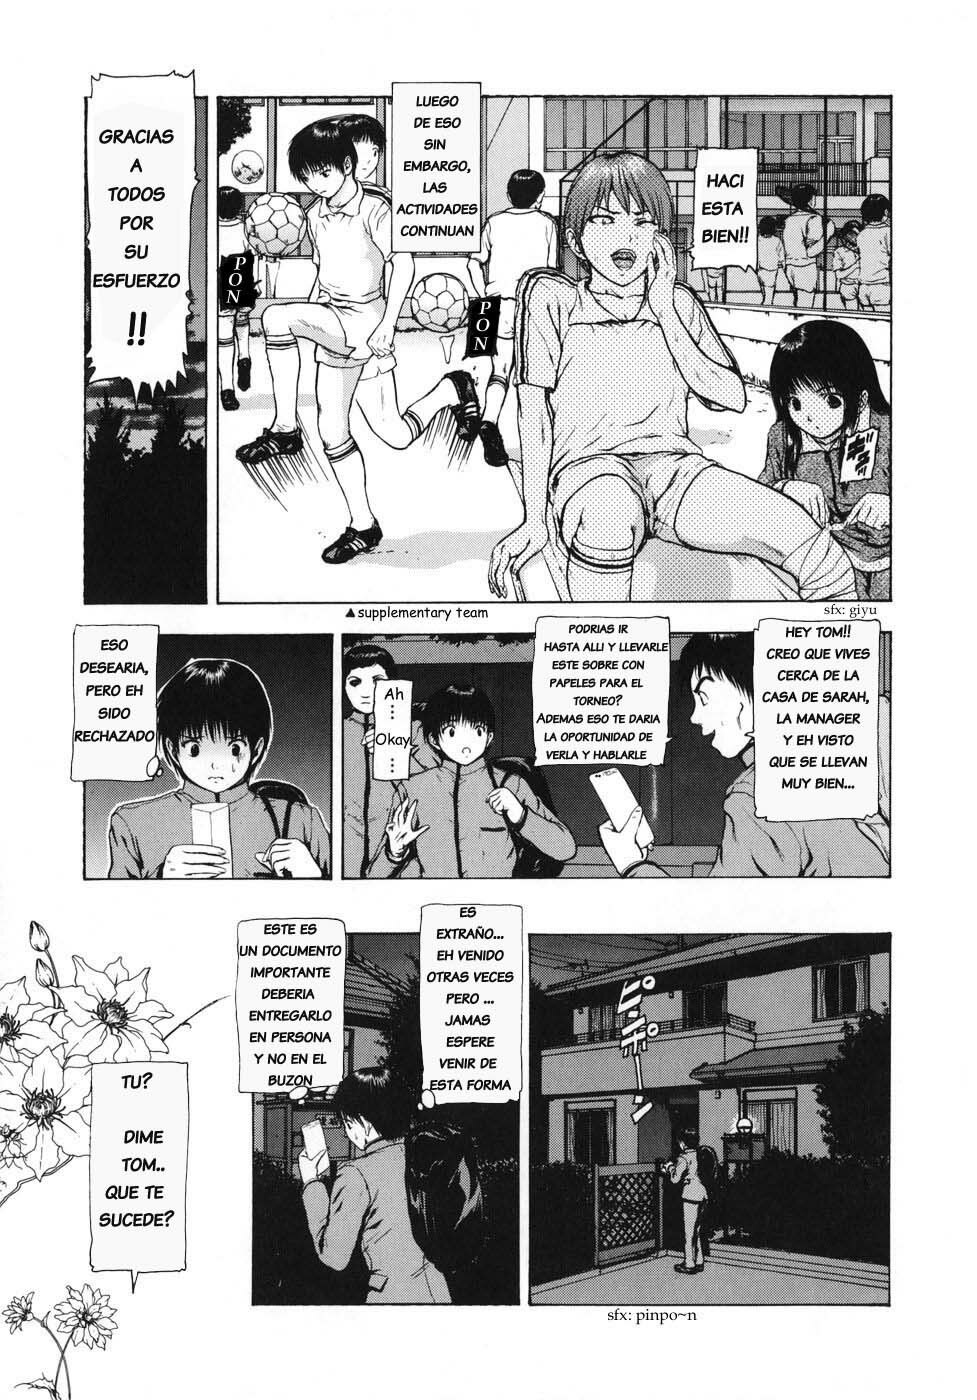 aceptame page 3 full